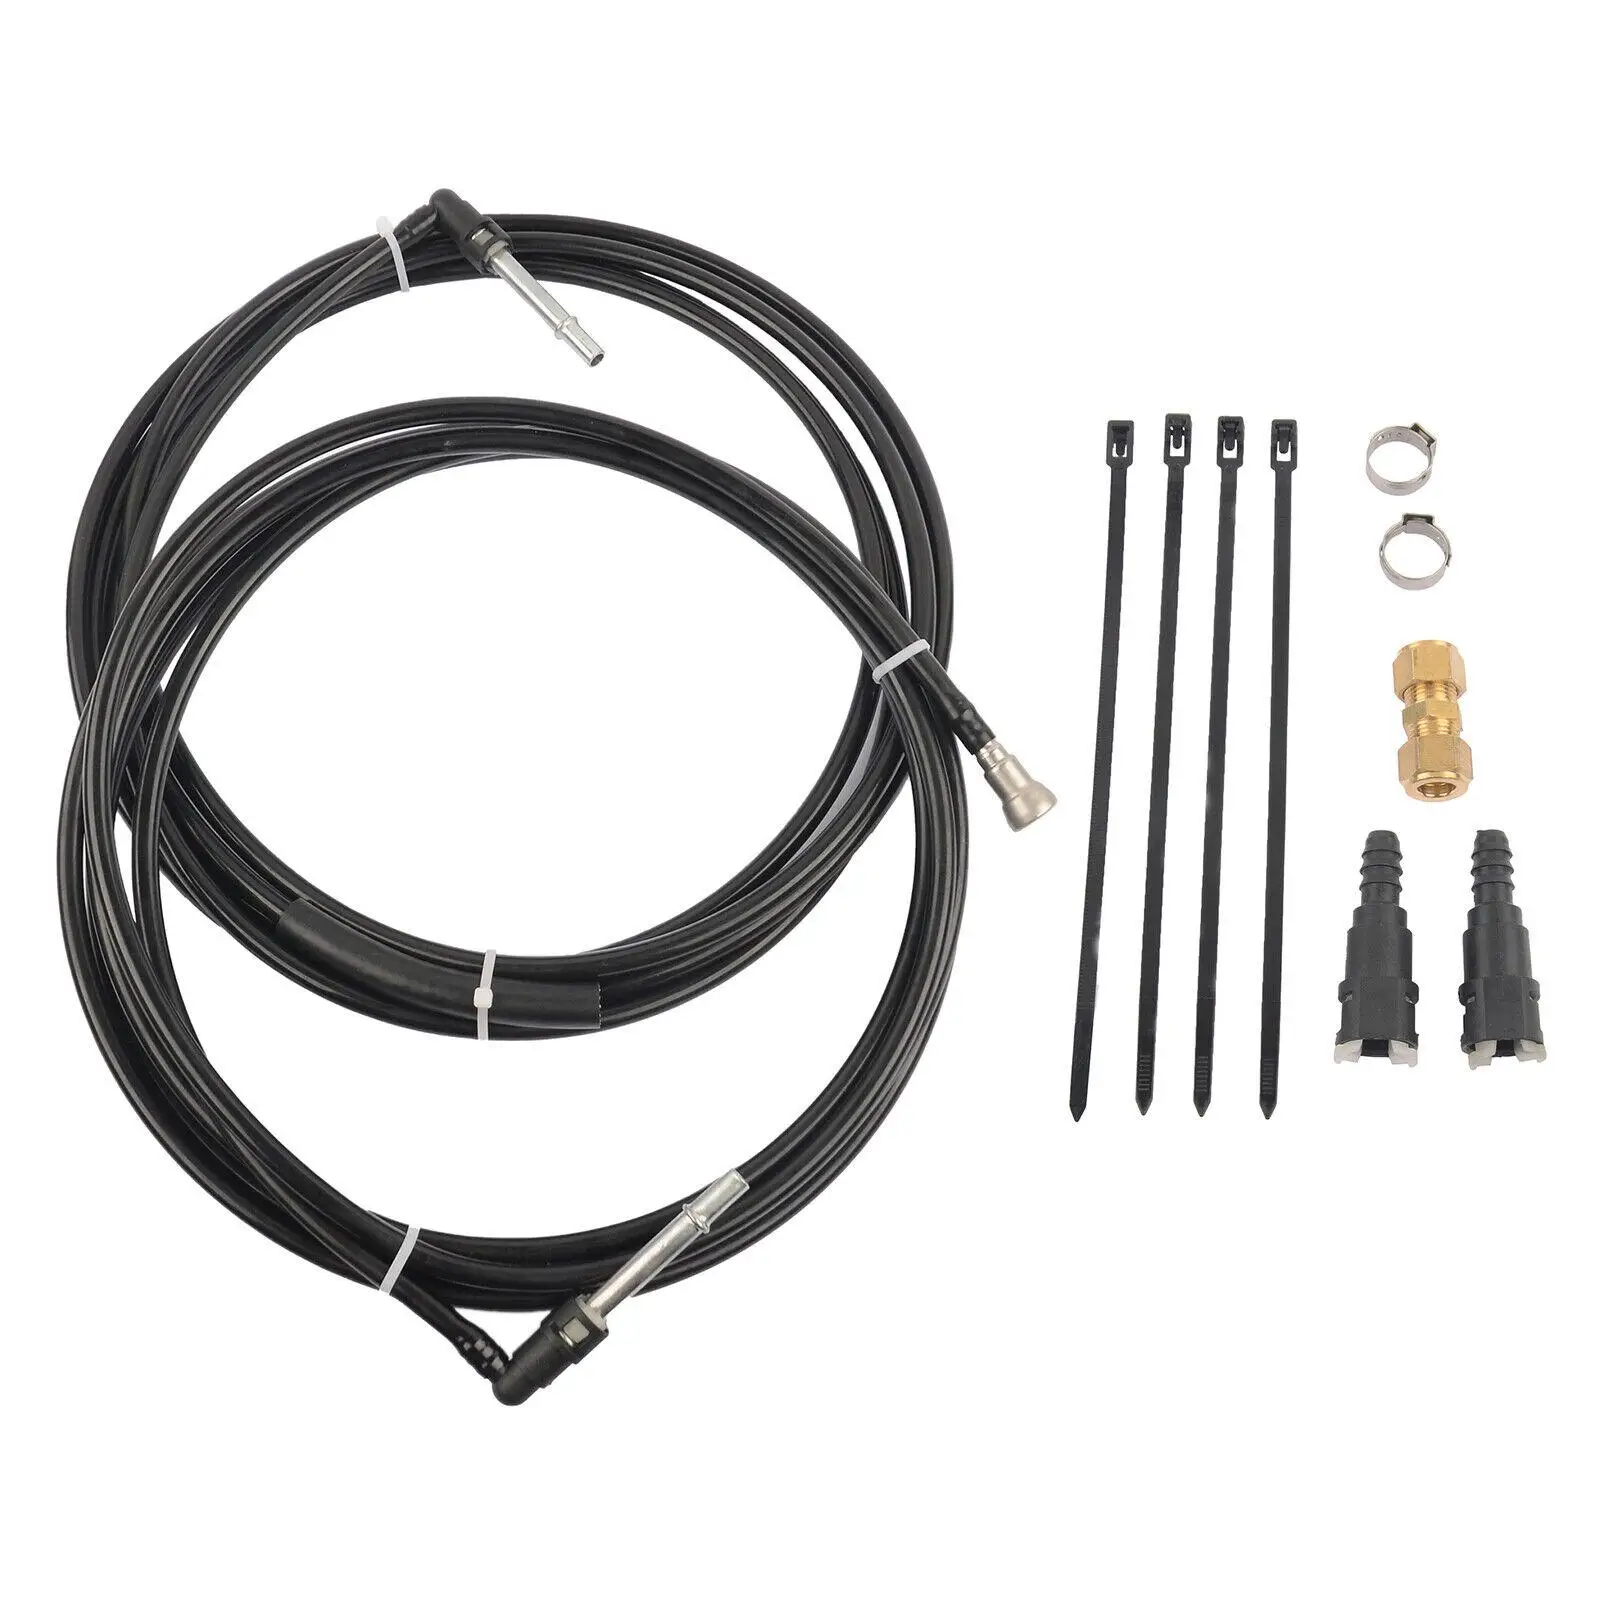 Fuel Lines Kit Flfg0340 Replaces Durable for Chevy Silverado GMC Sierra 1500 2500 3500 Vehicle Spare Parts Easily Install